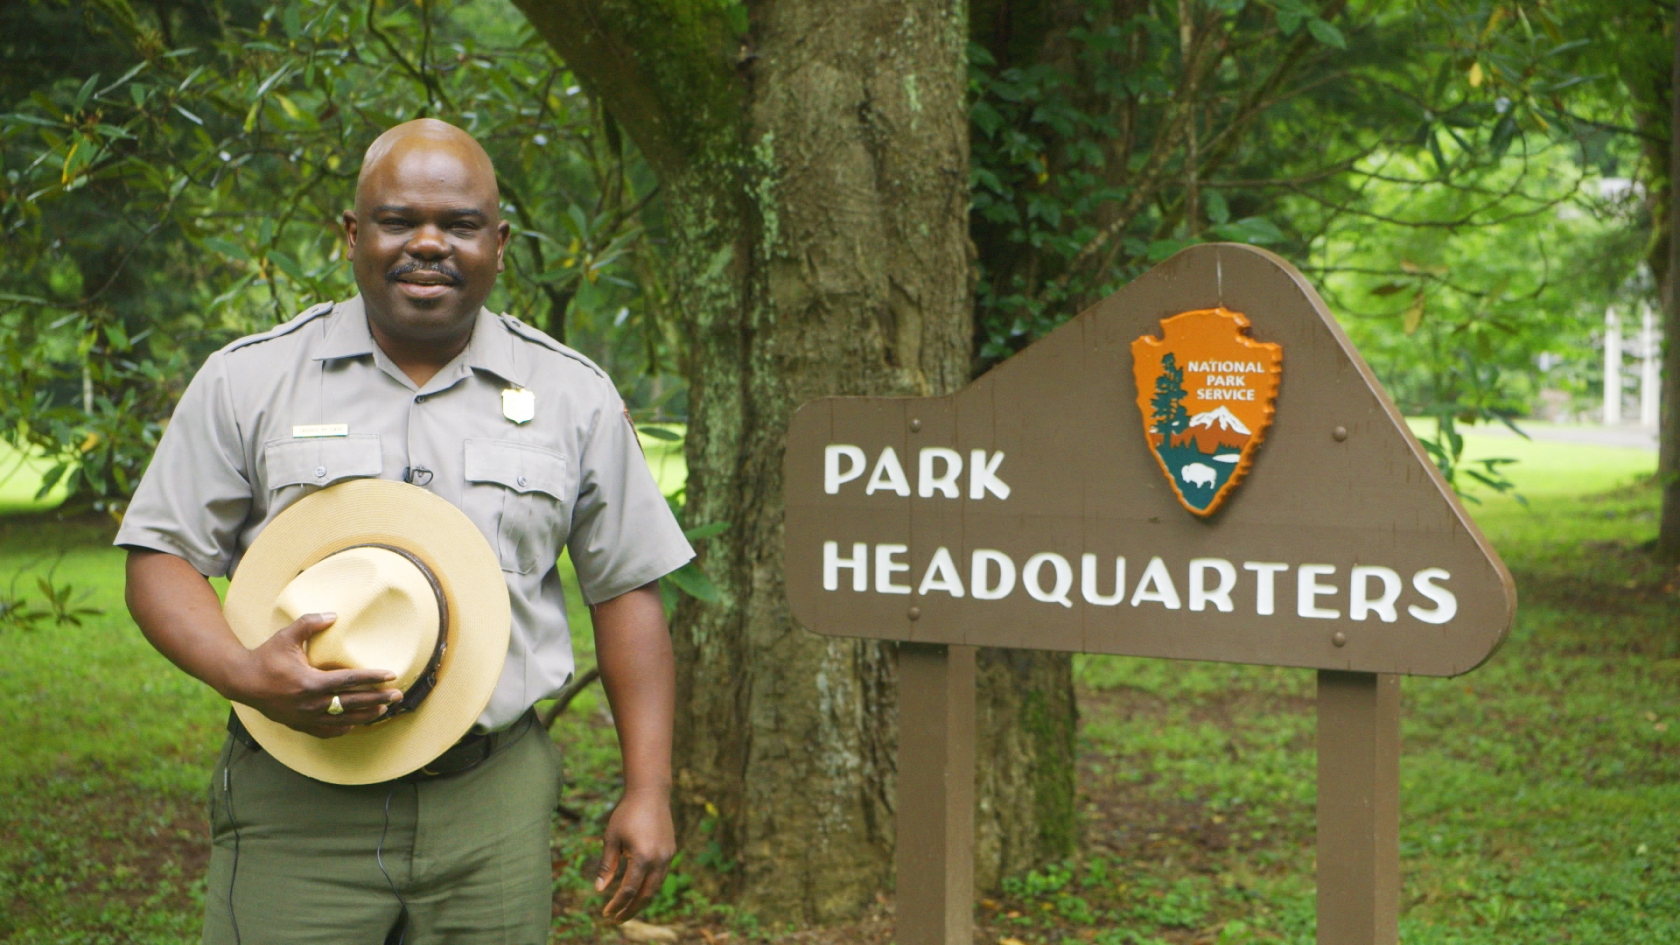 Superintendent Cassius Cash stands next to the park headquarters sign